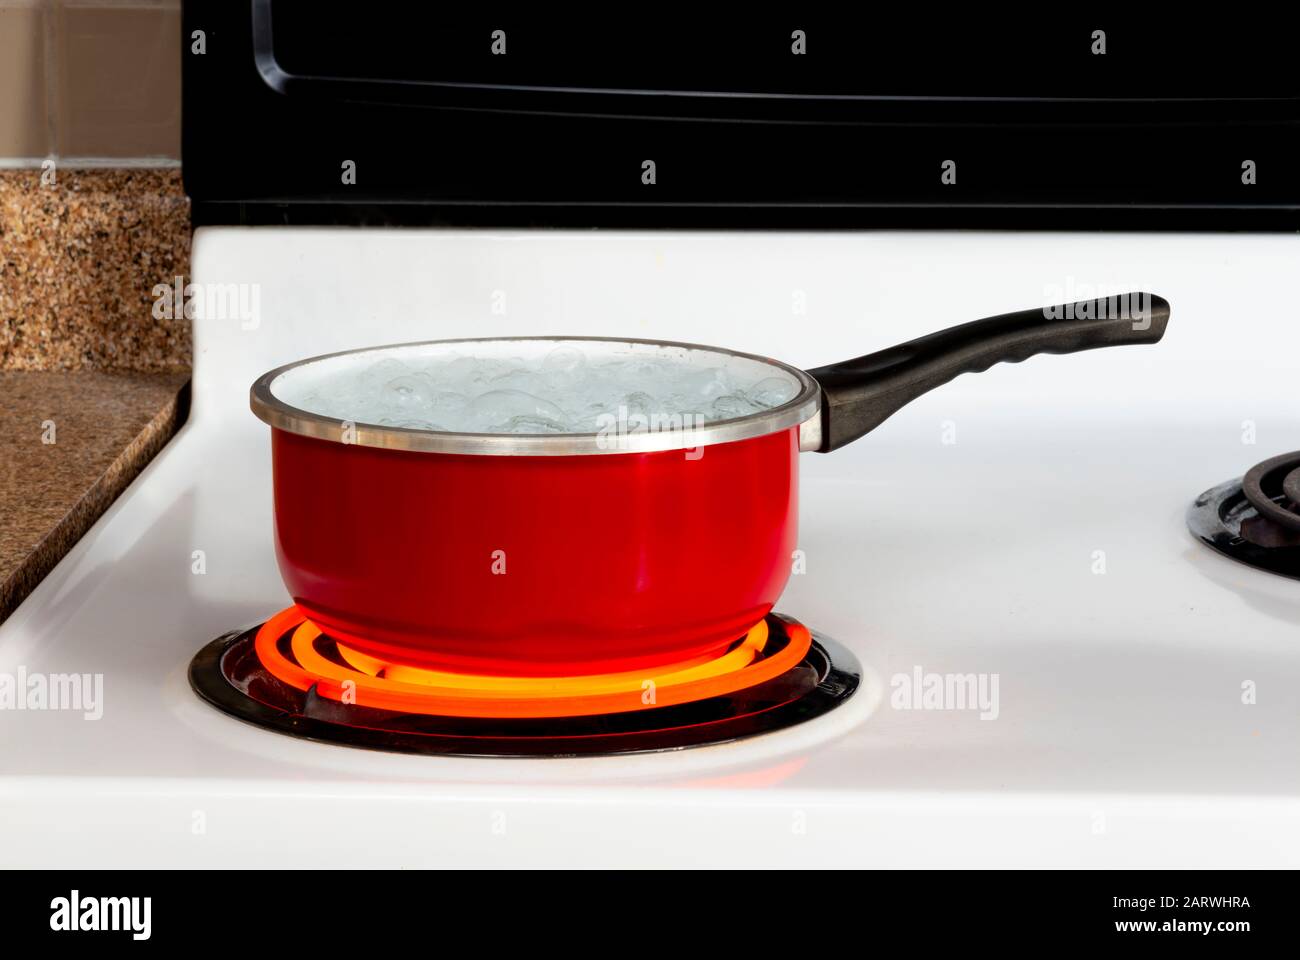 Horizontal shot of a red pan of boiling water on top of a stove with the burner turned to high. Stock Photo